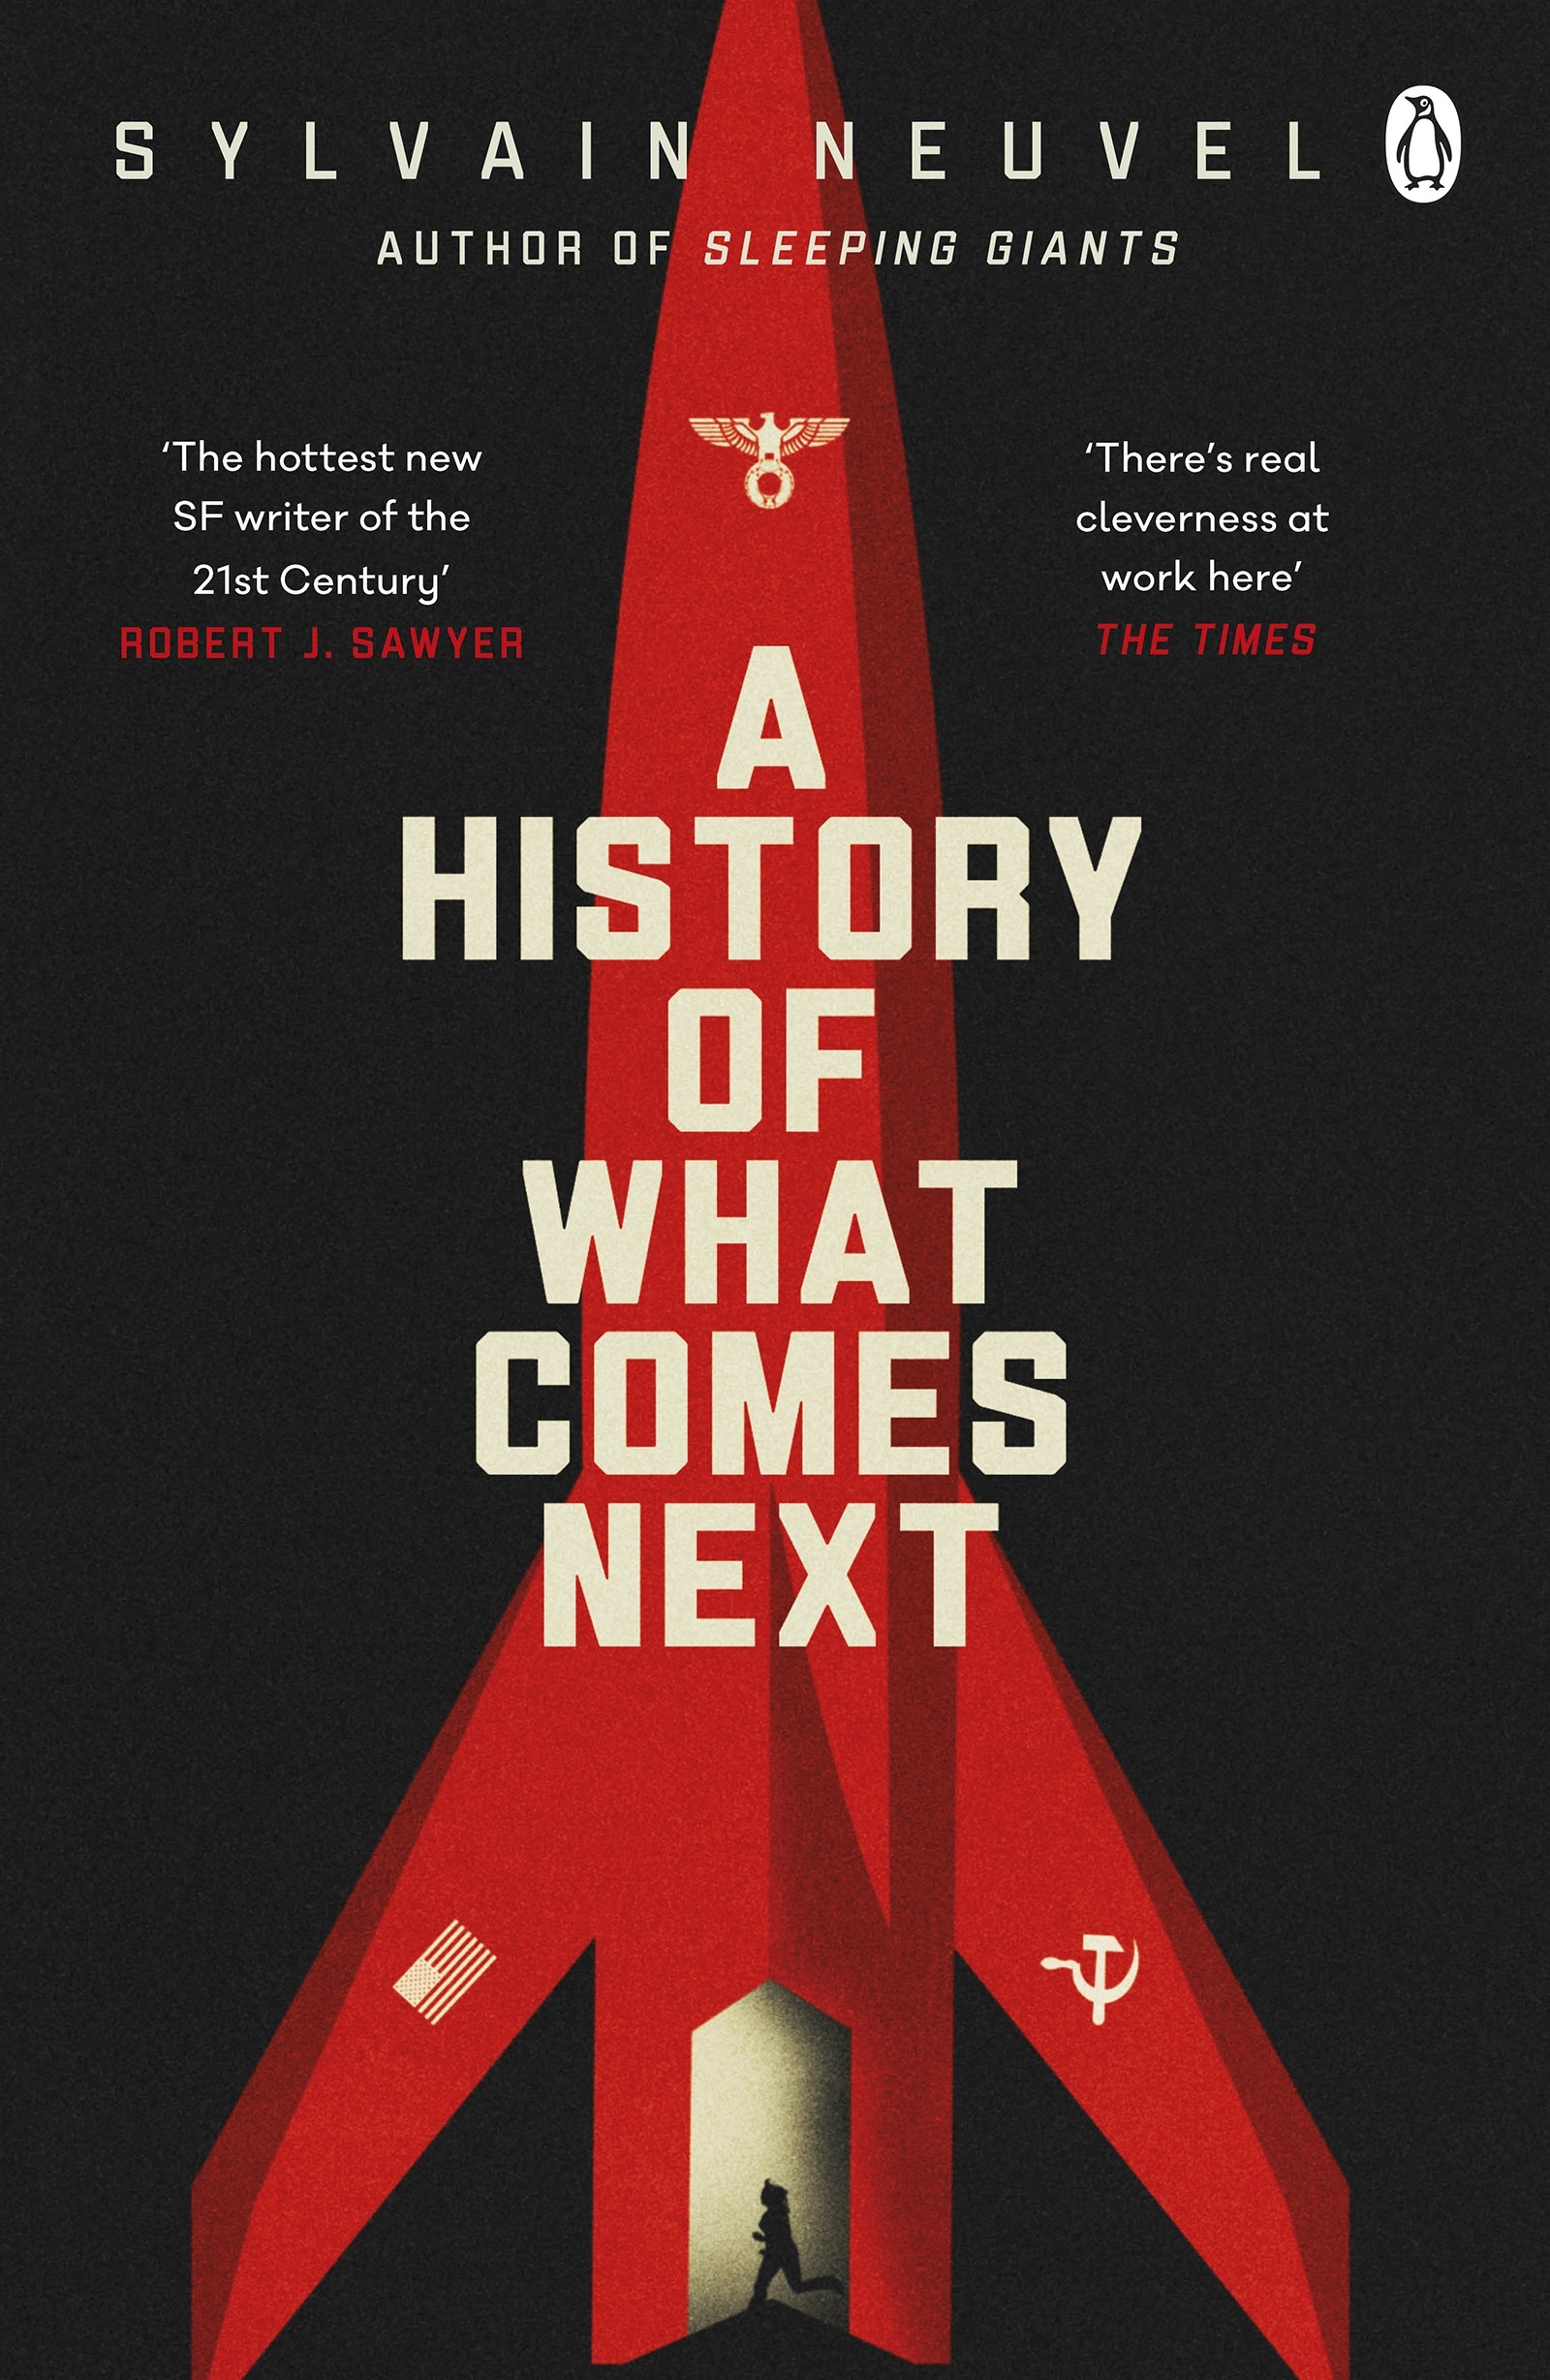 A History of What Comes Next by Sylvain Neuvel - Penguin Books Australia